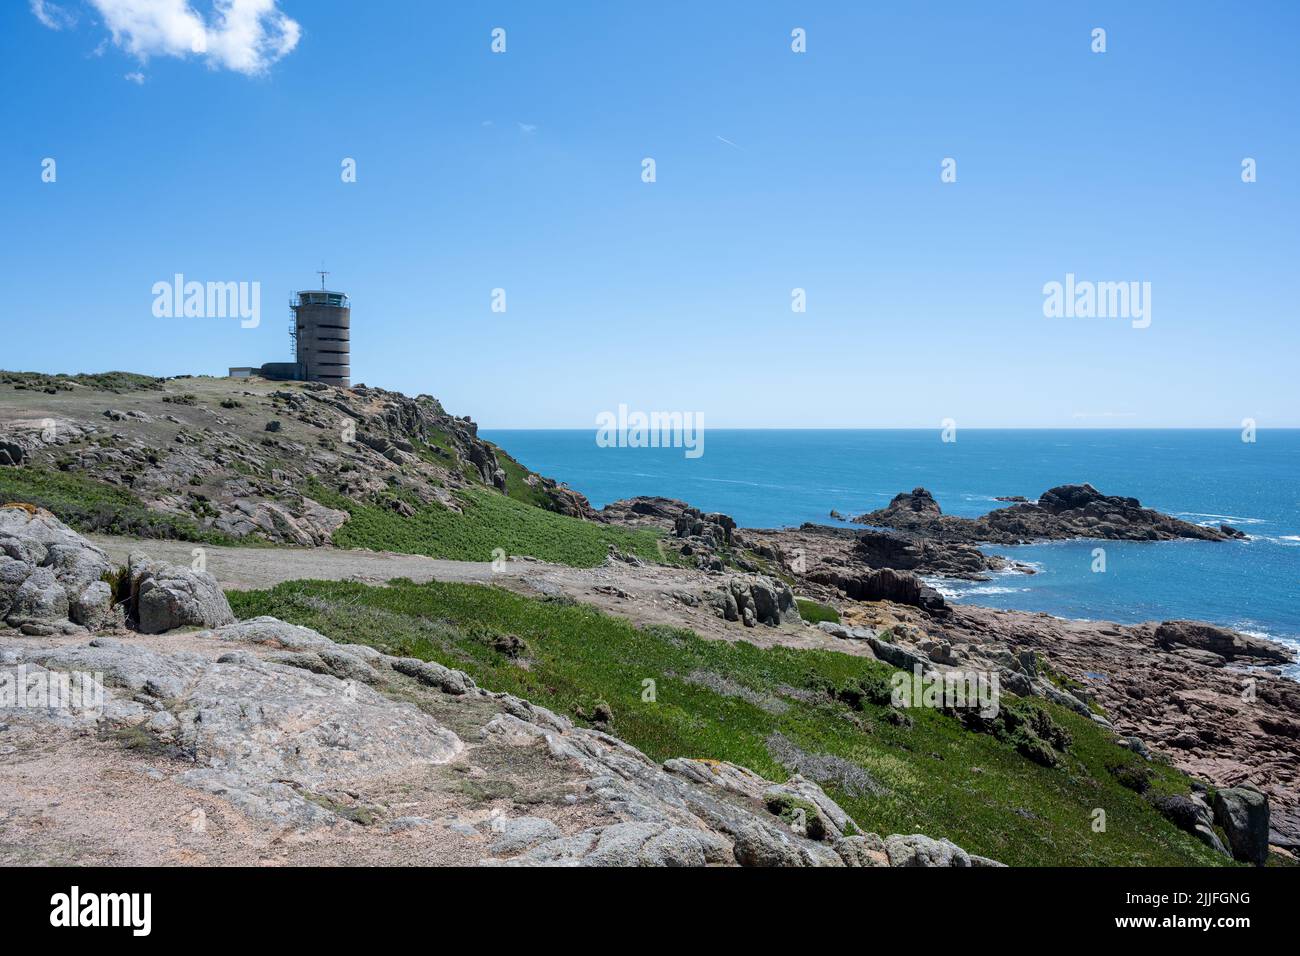 La Corbiere WW2 watchtower on the headland of St Brelade in the south-west of the British Crown Dependency of Jersey, Channel Islands, British Isles. Stock Photo